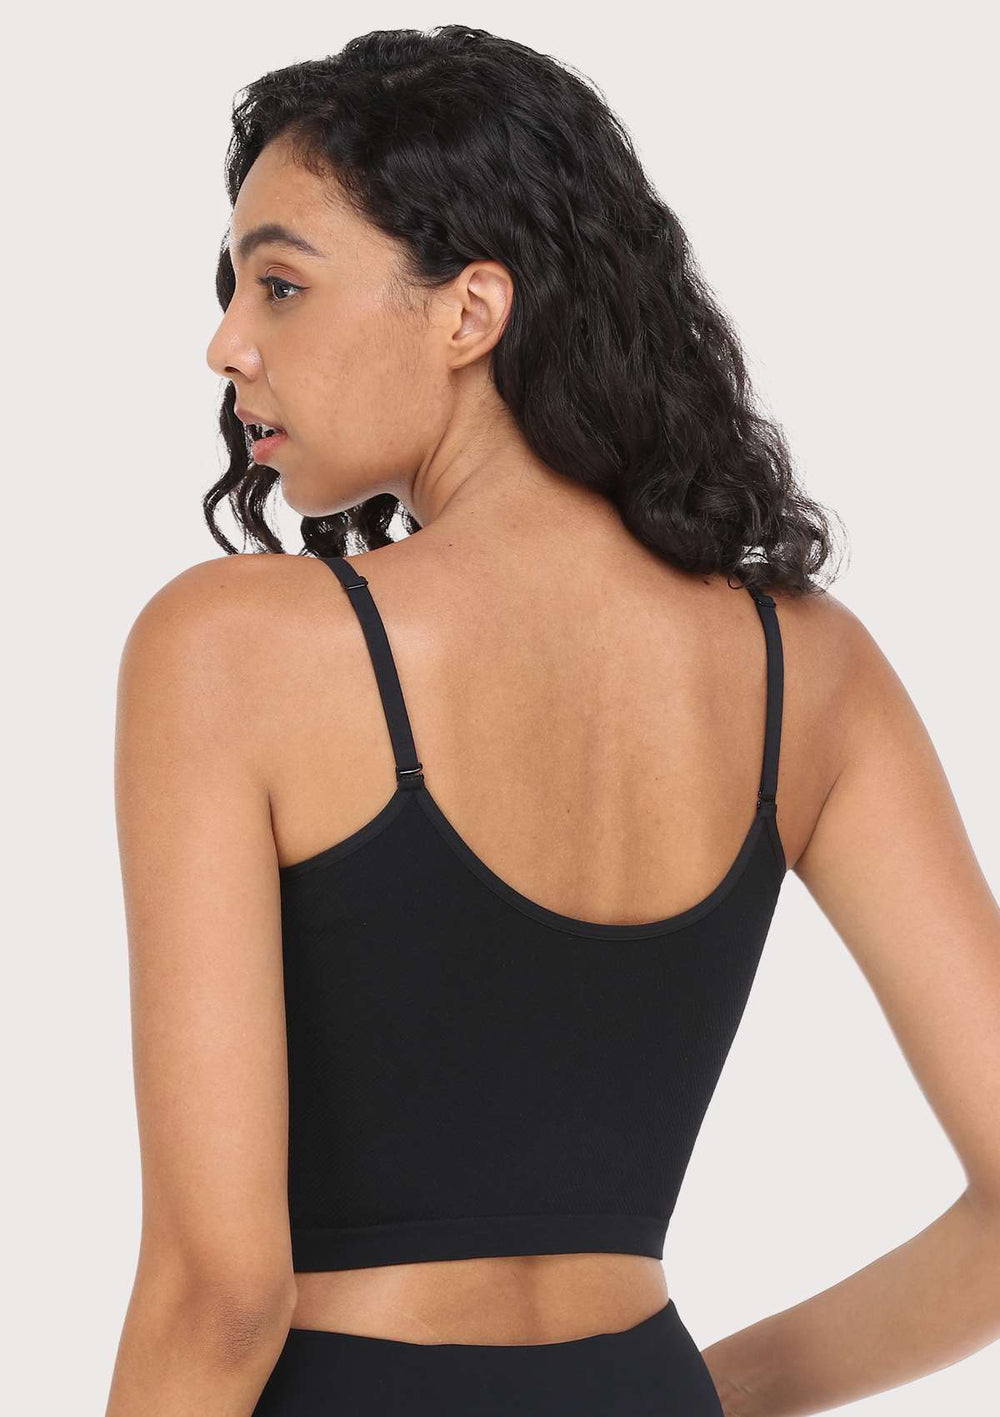 Yoga Tops With Built In Bra  Music